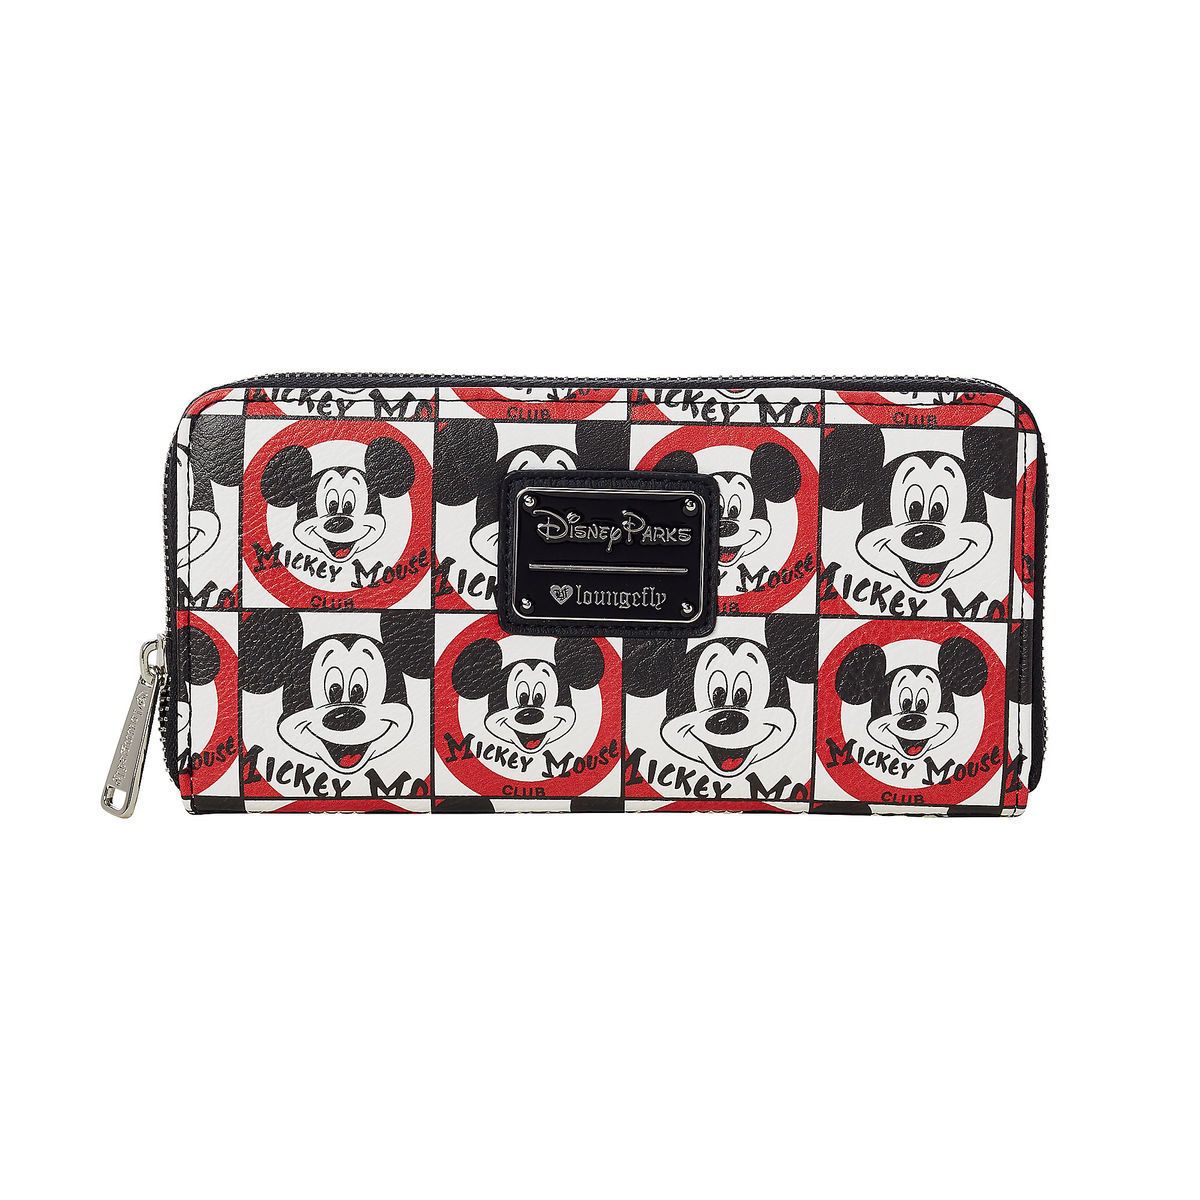 DISNEY PARKS LOUNGEFLY WALLET THE MICKEY MOUSE CLUB